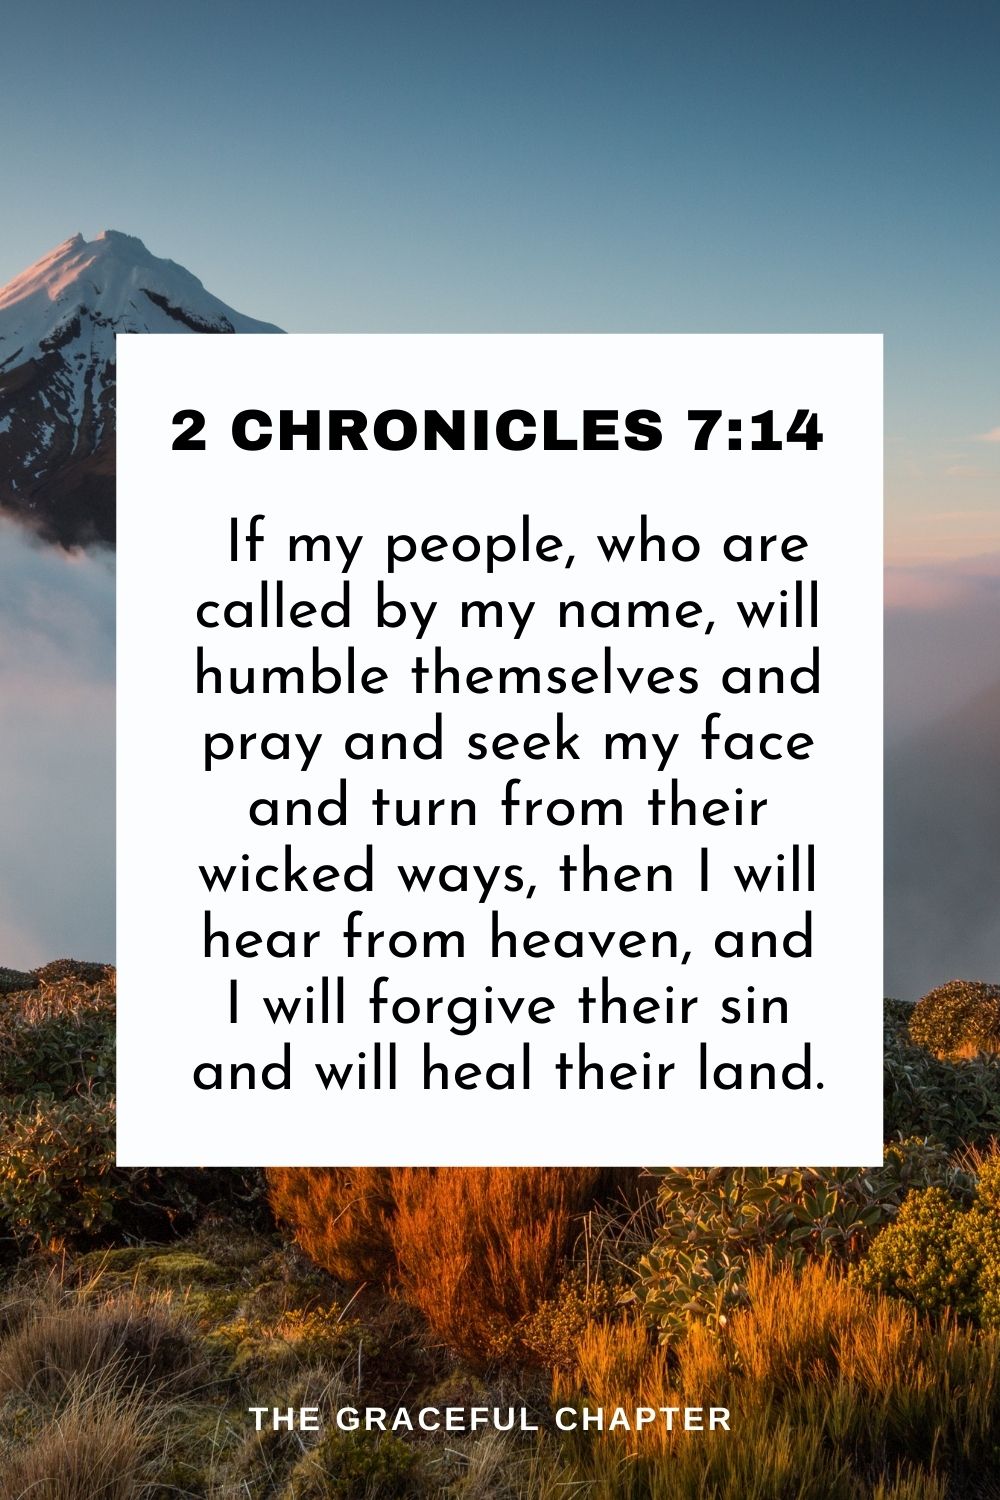 If my people, who are called by my name, will humble themselves and pray and seek my face and turn from their wicked ways, then I will hear from heaven, and I will forgive their sin and will heal their land. 2 Chronicles 7:14